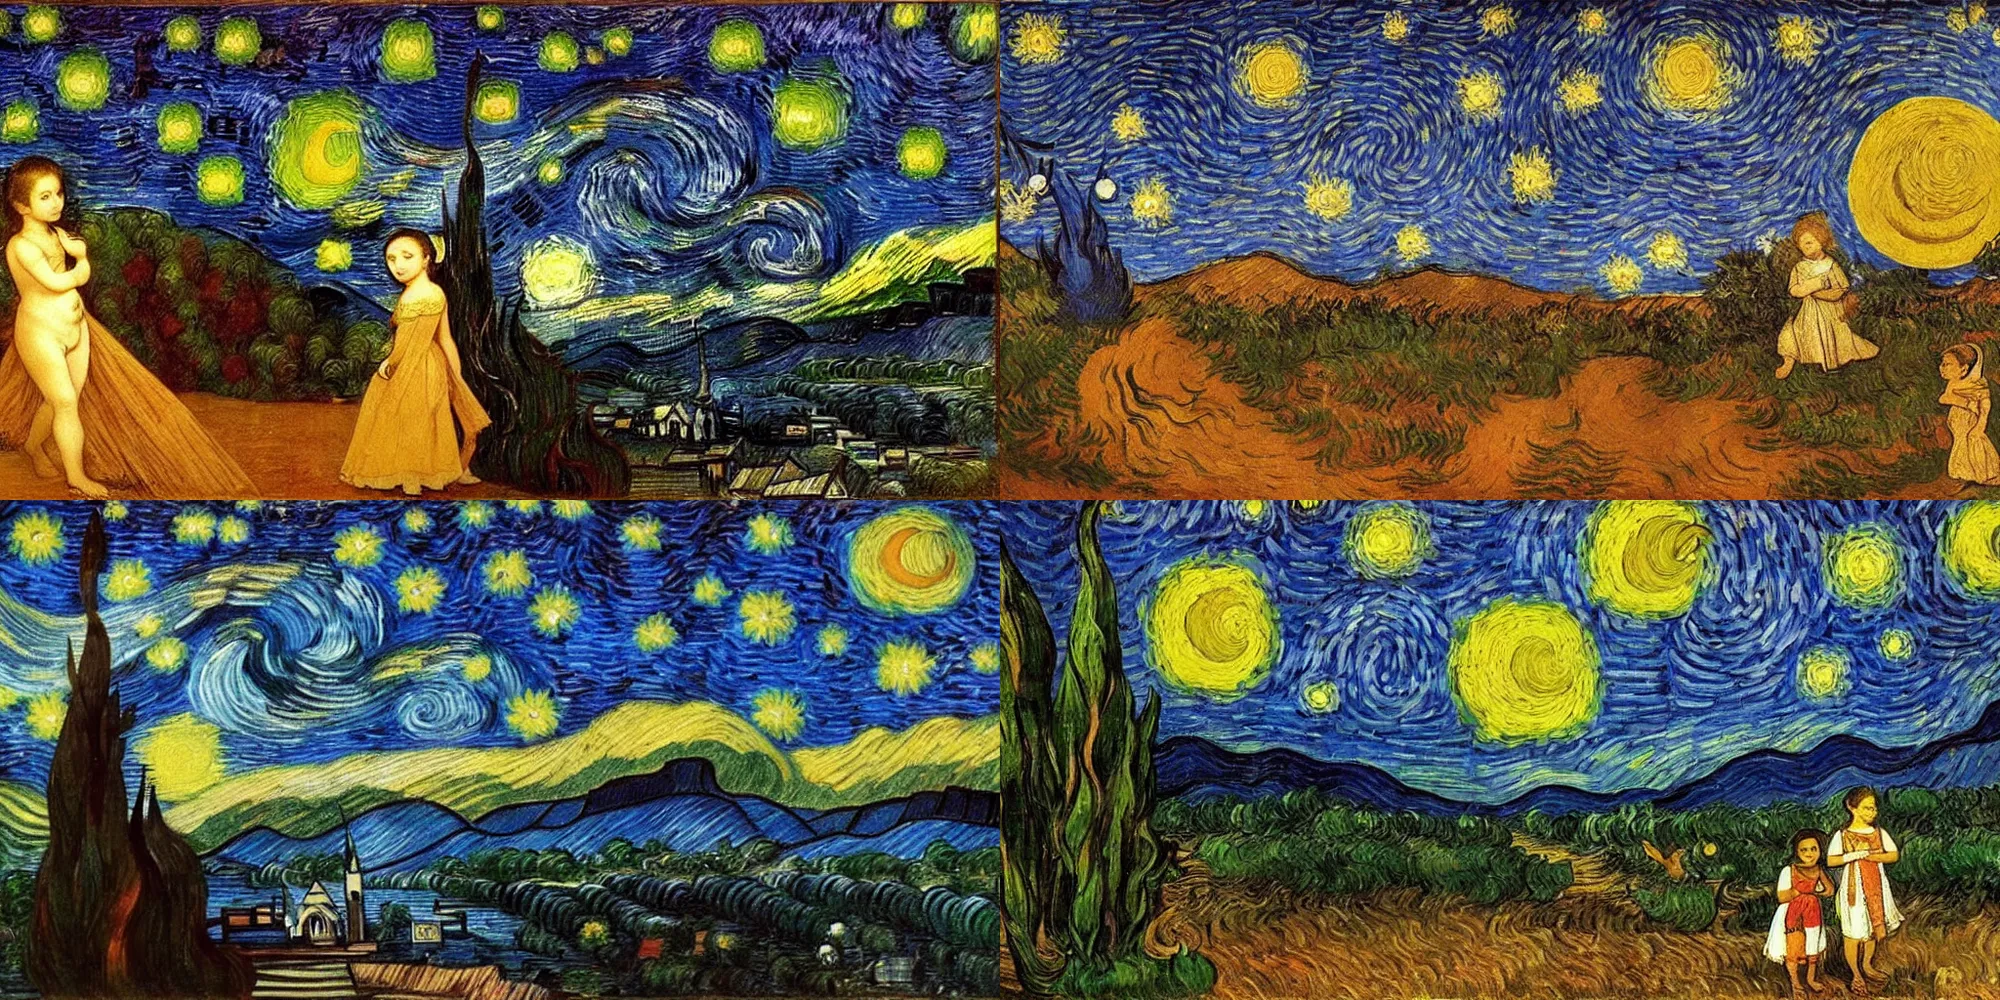 Prompt: a collaborative painting of kerala by leonardo da vinci and van Gogh, starry nights, a little girl looking up in wonder in the foreground